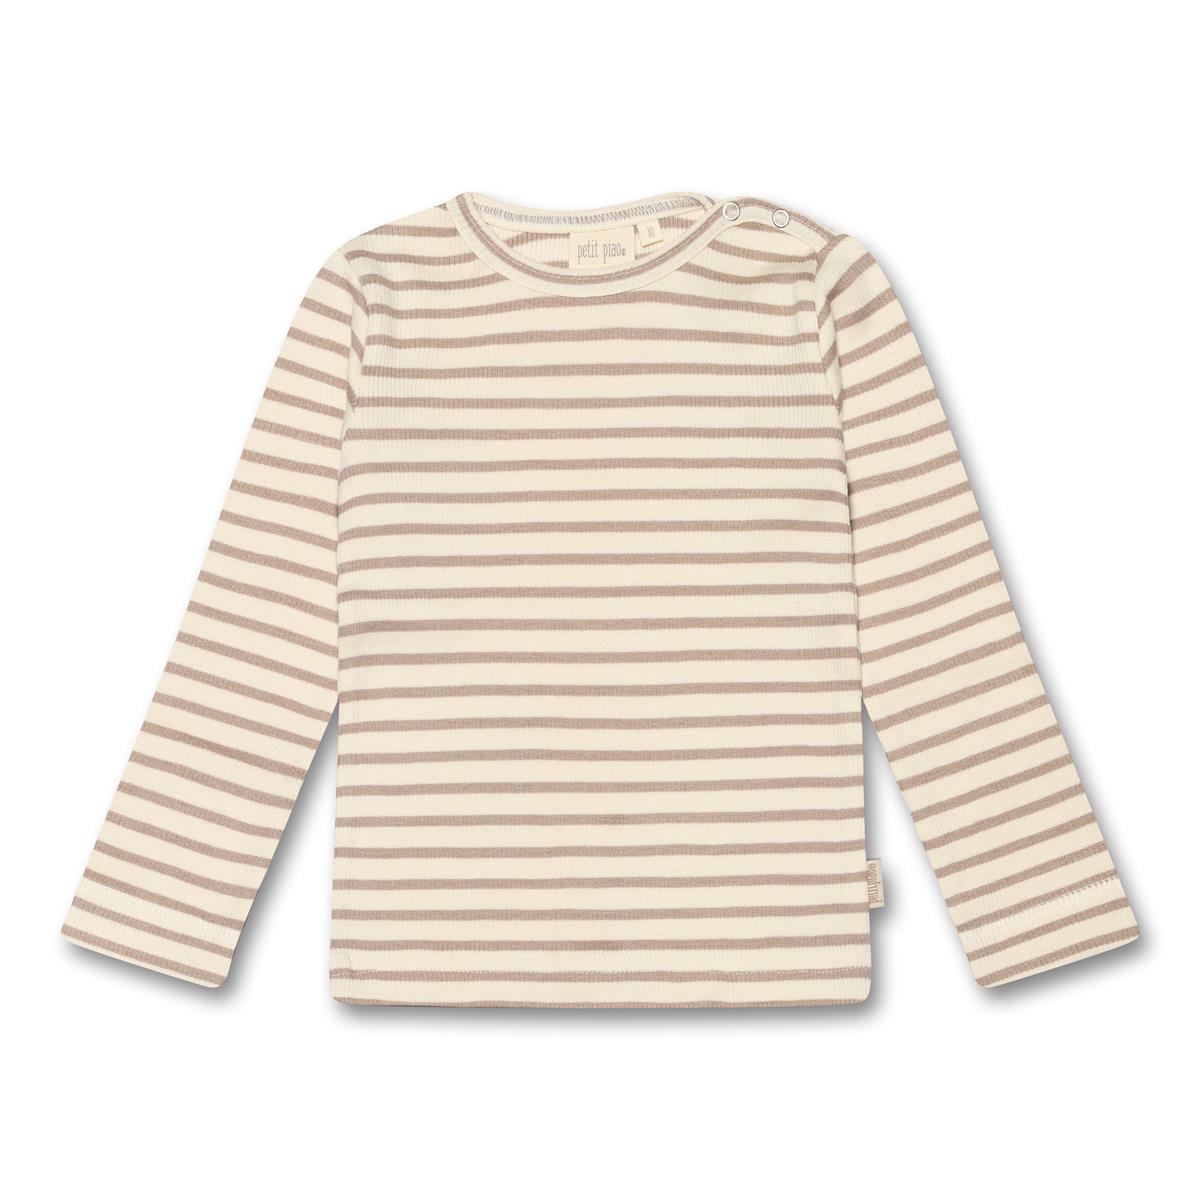 Petit Piao-T-shirt L/S Modal Striped-Simply Taupe/Off White